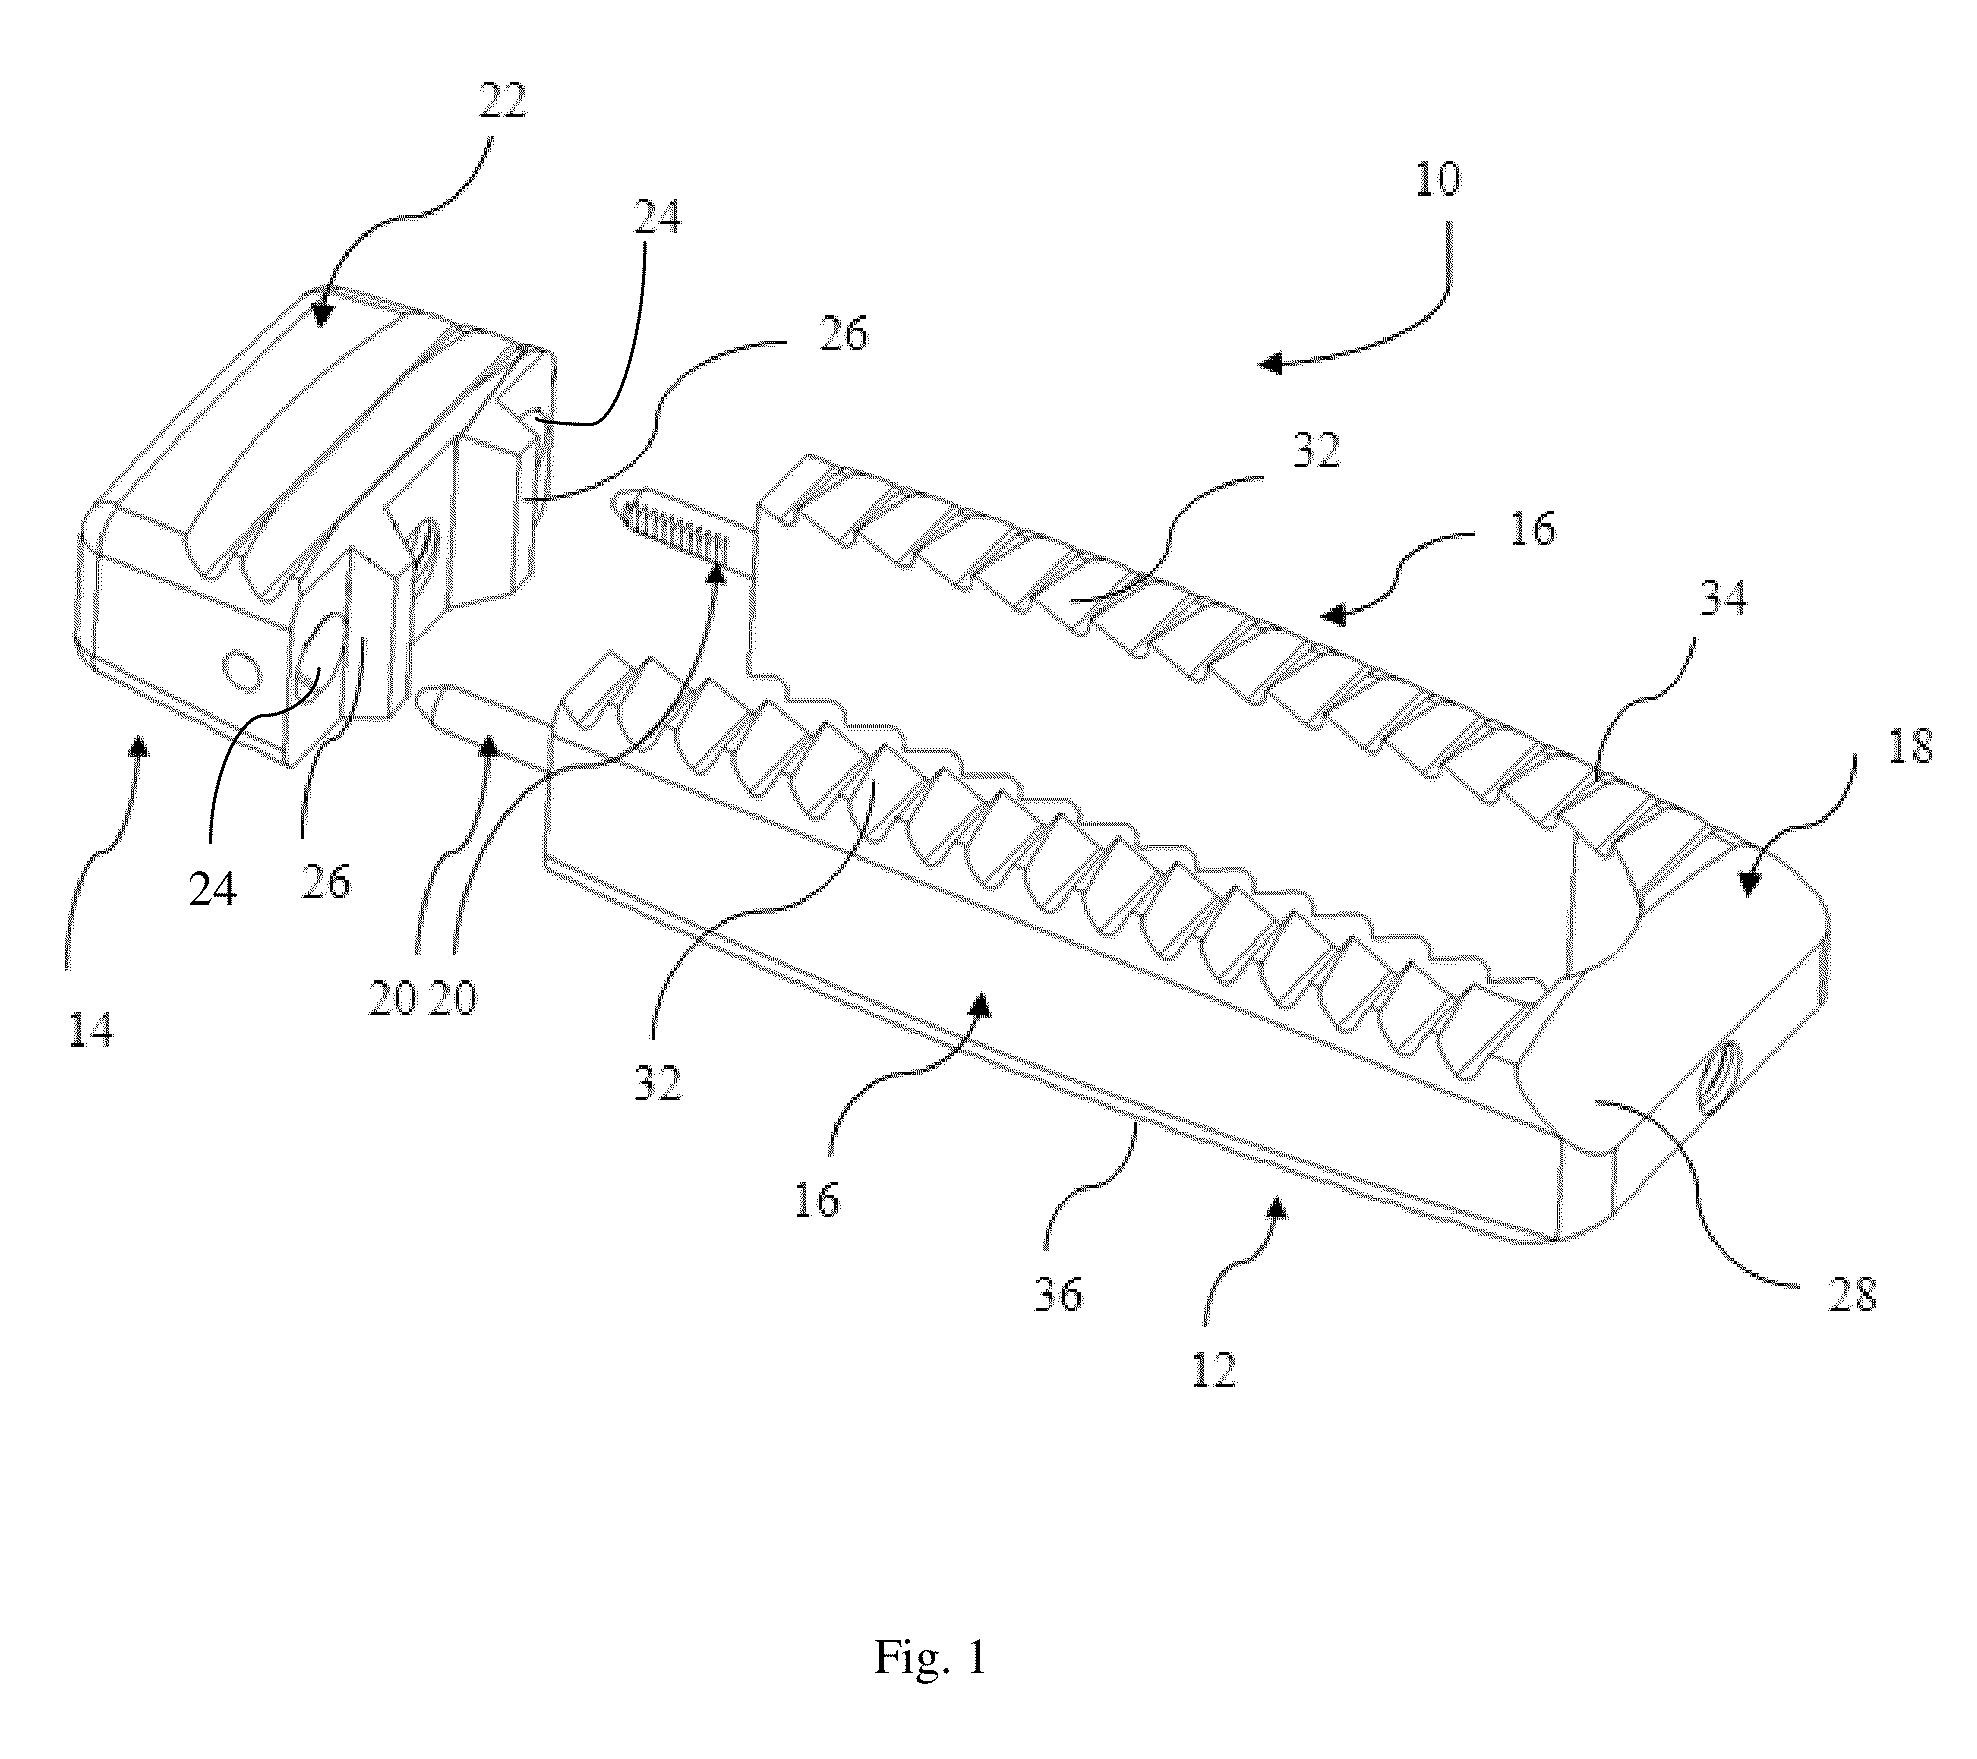 Interbody fusion implant and related methods